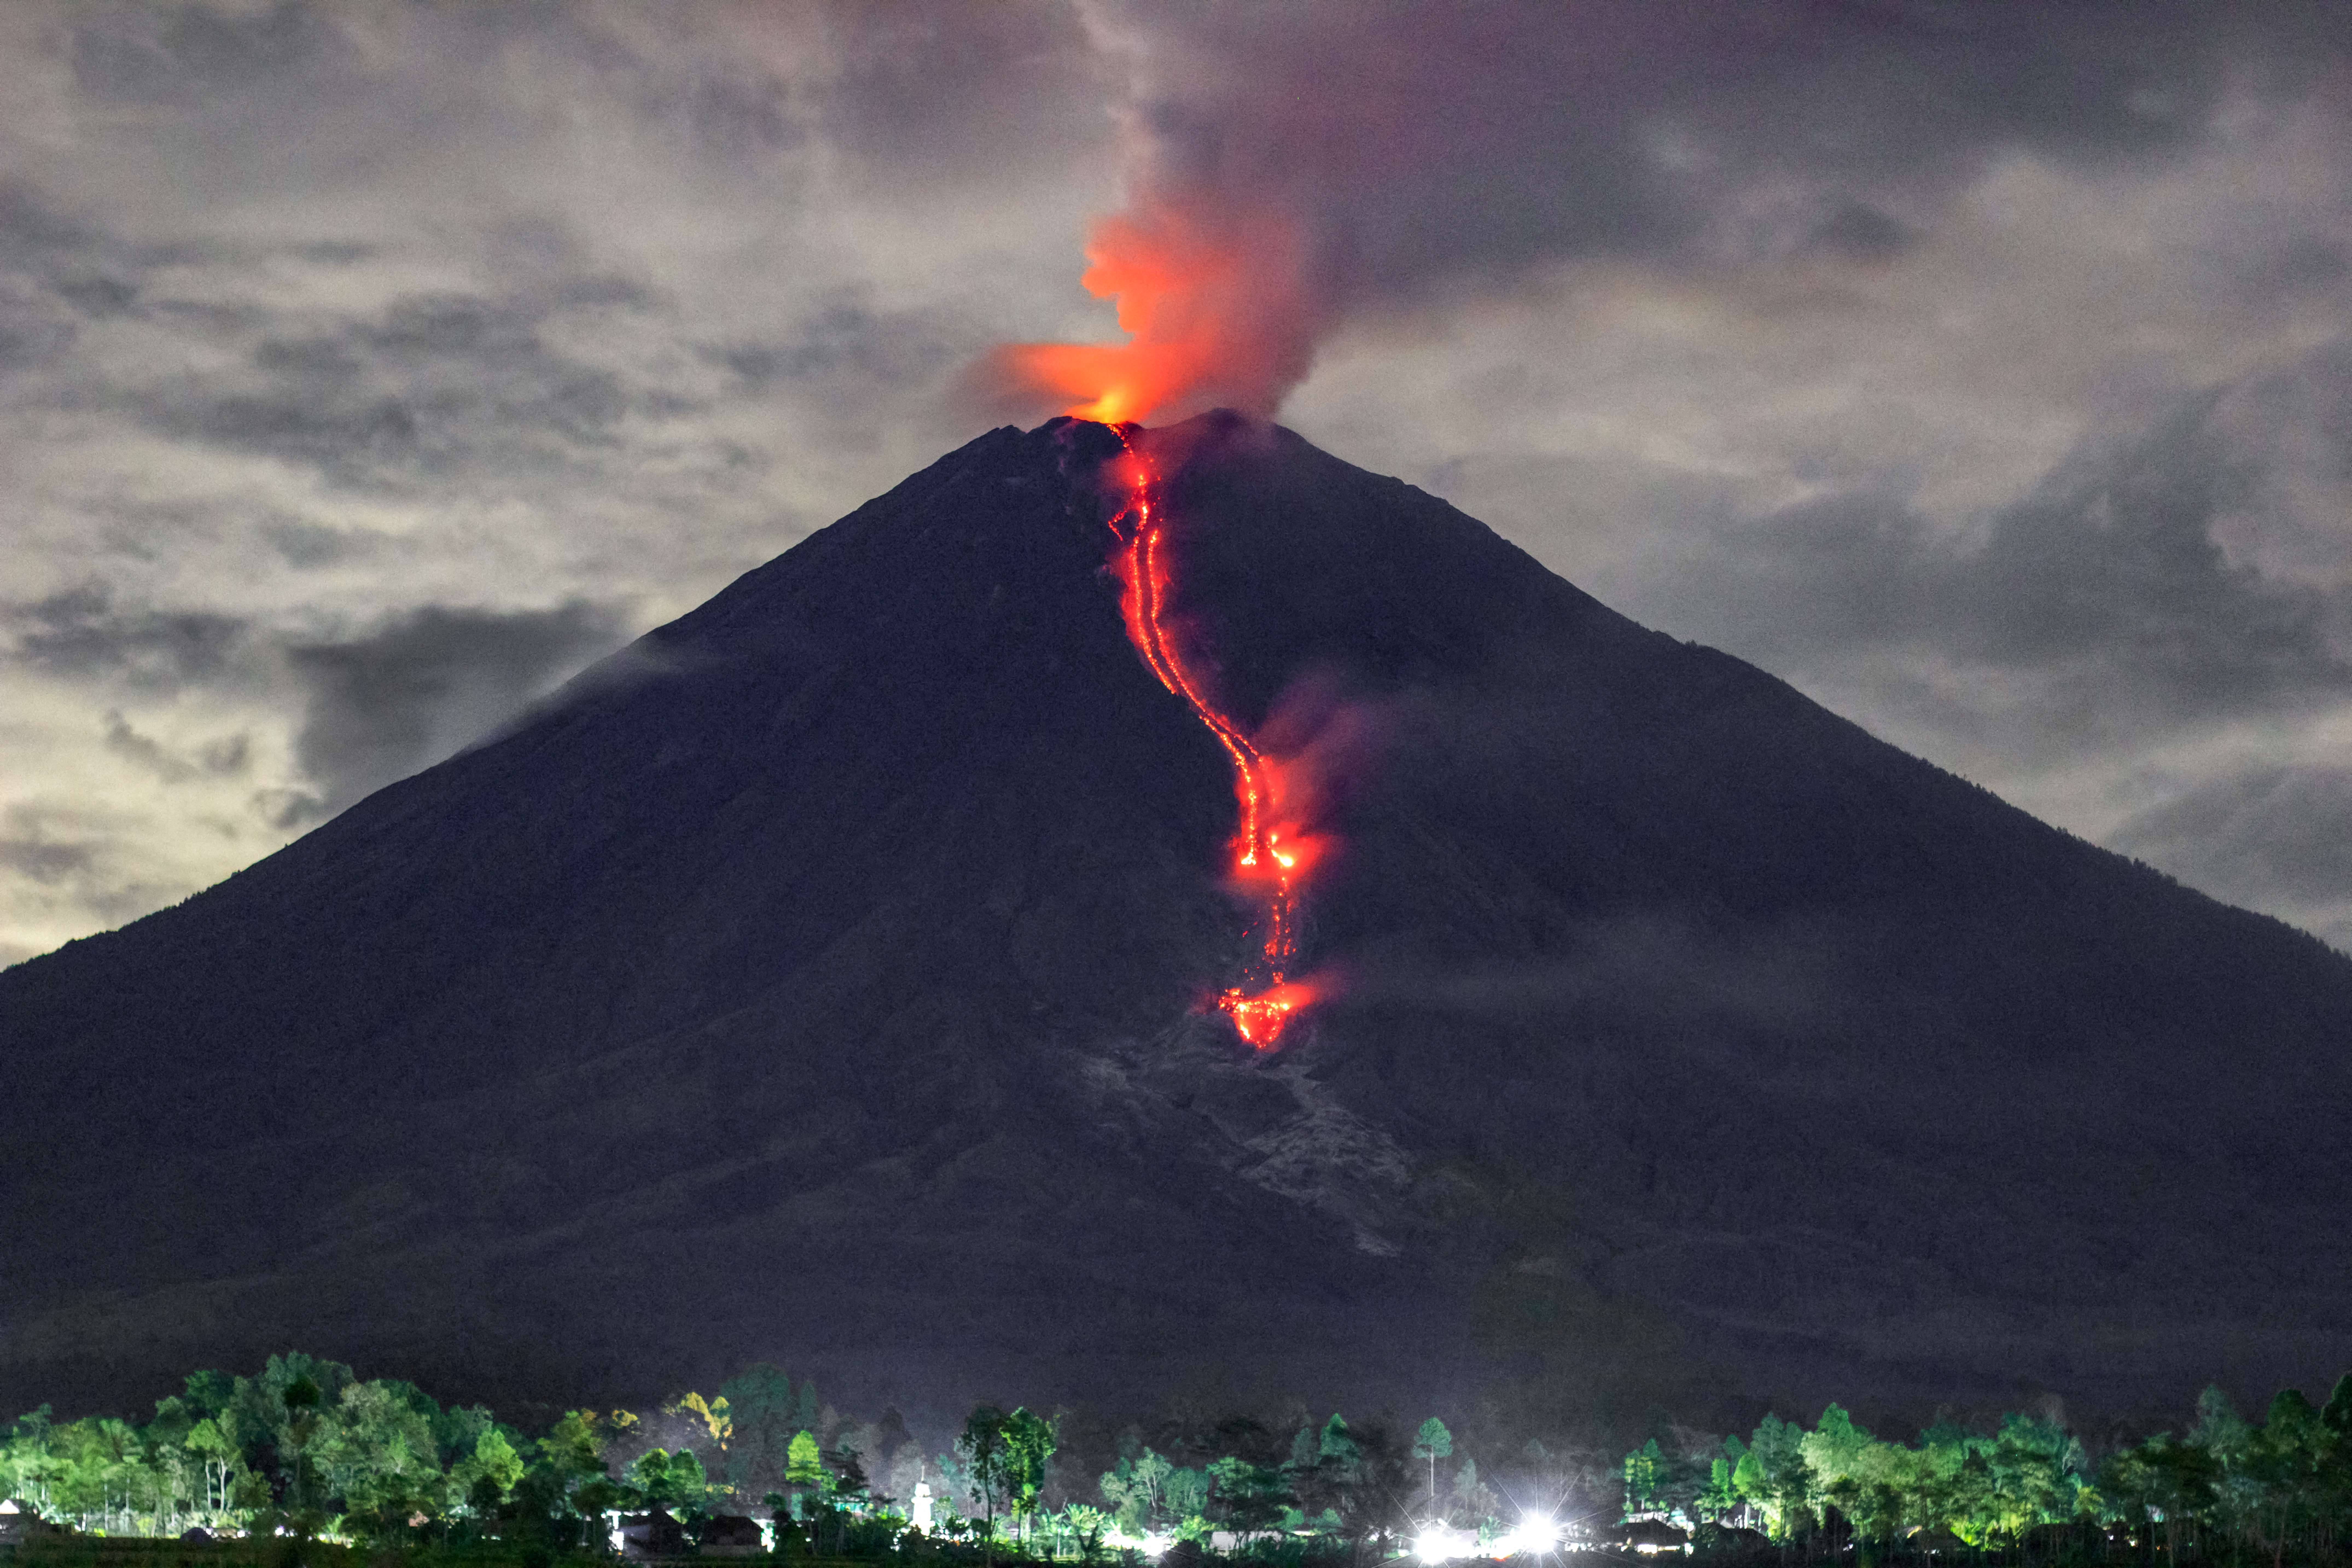 Lava hisses down Java’s Mount Semeru, which erupted on 4 December 2021